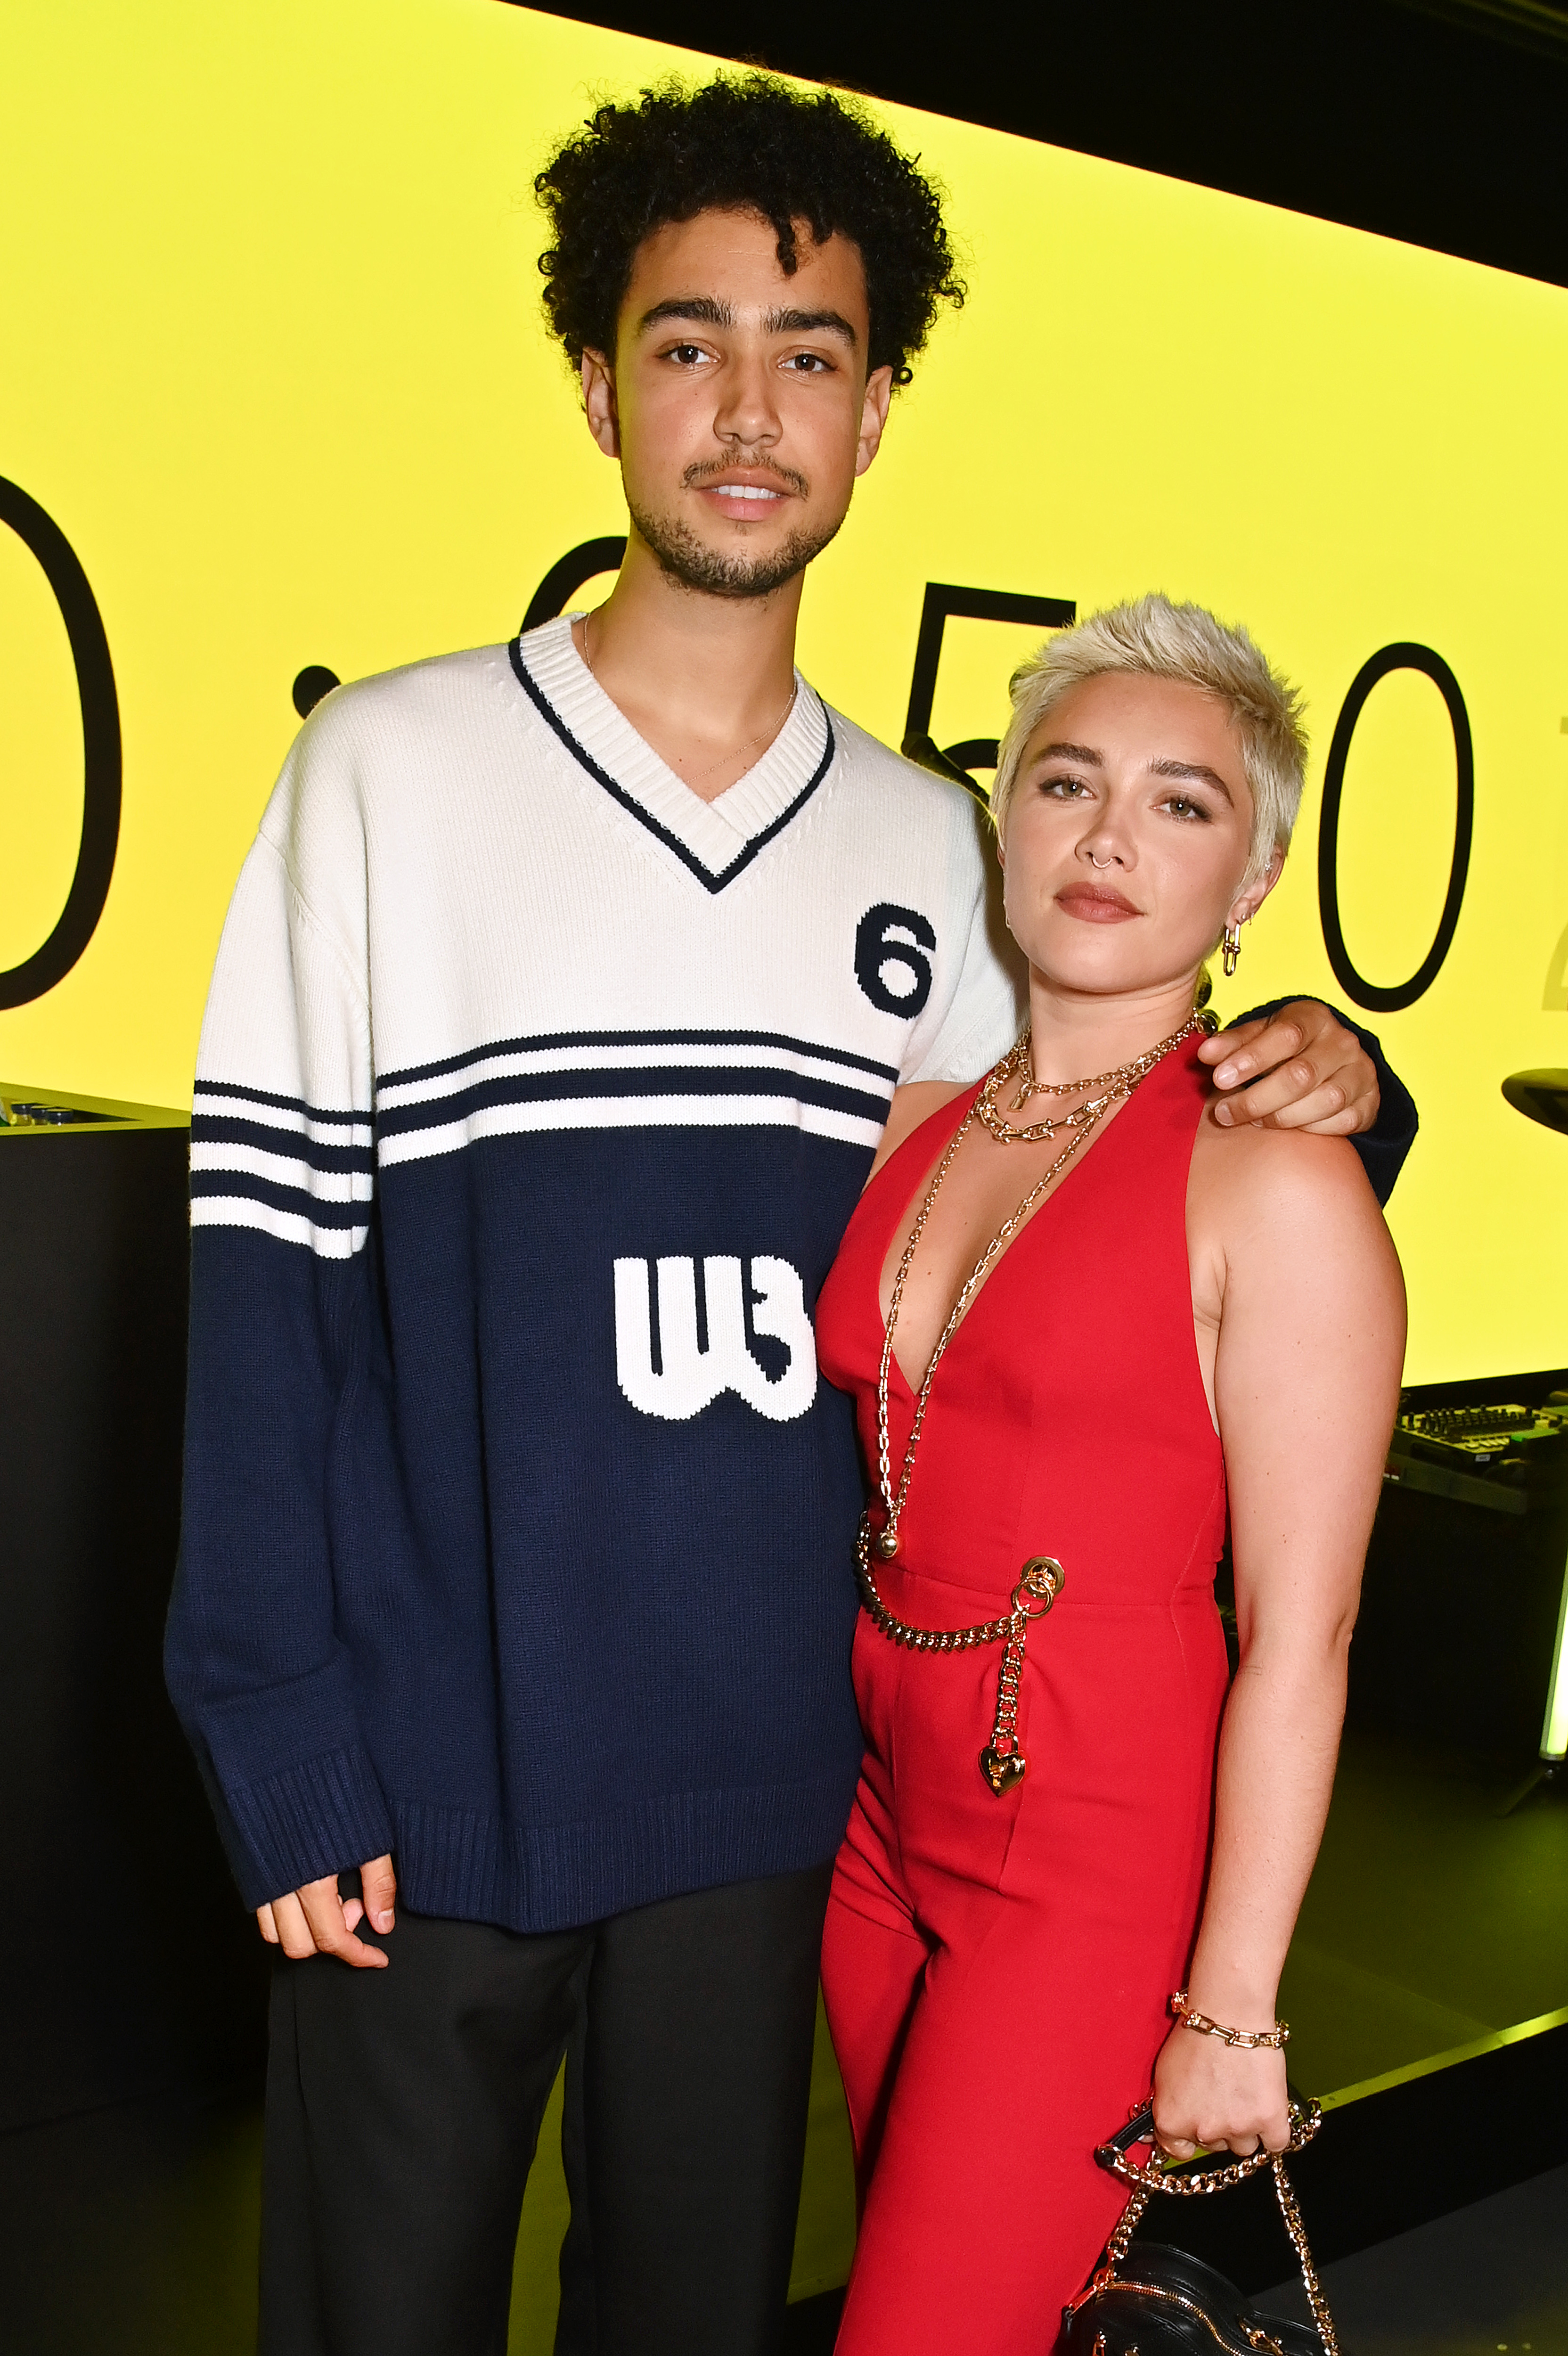 Archie Madekwe and Florence Pugh at the launch of Lotus London, the first flagship in Europe for Lotus cars, on July 27, 2023, in London, England. | Source: Getty Images